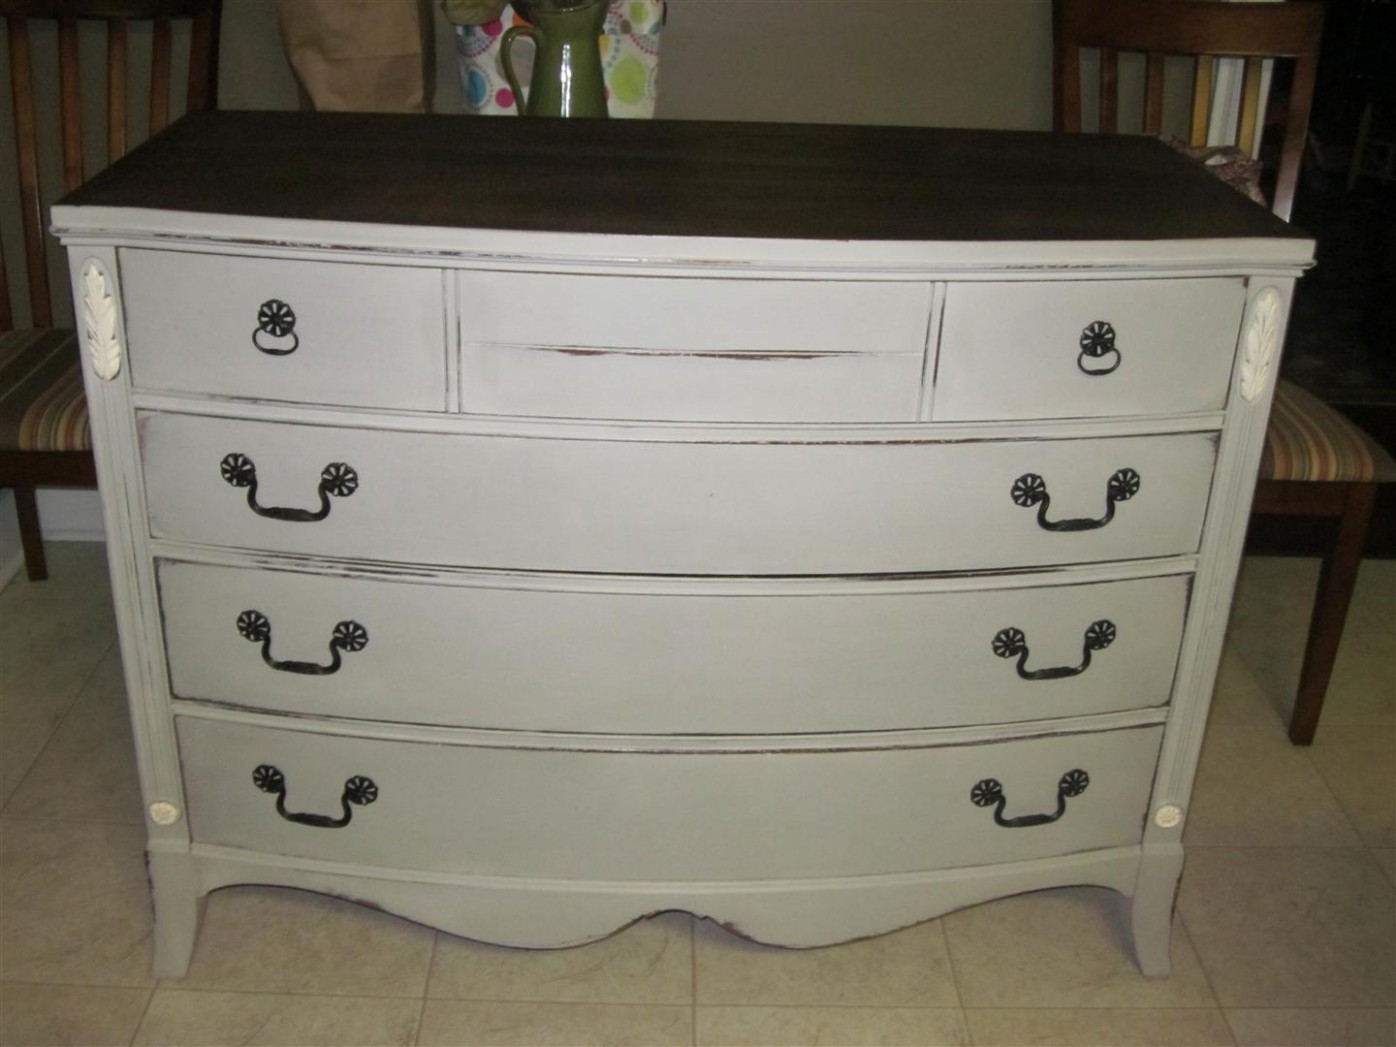 Painted On Hartland: 9 Annie Sloan Chalk Paint Raleigh Nc